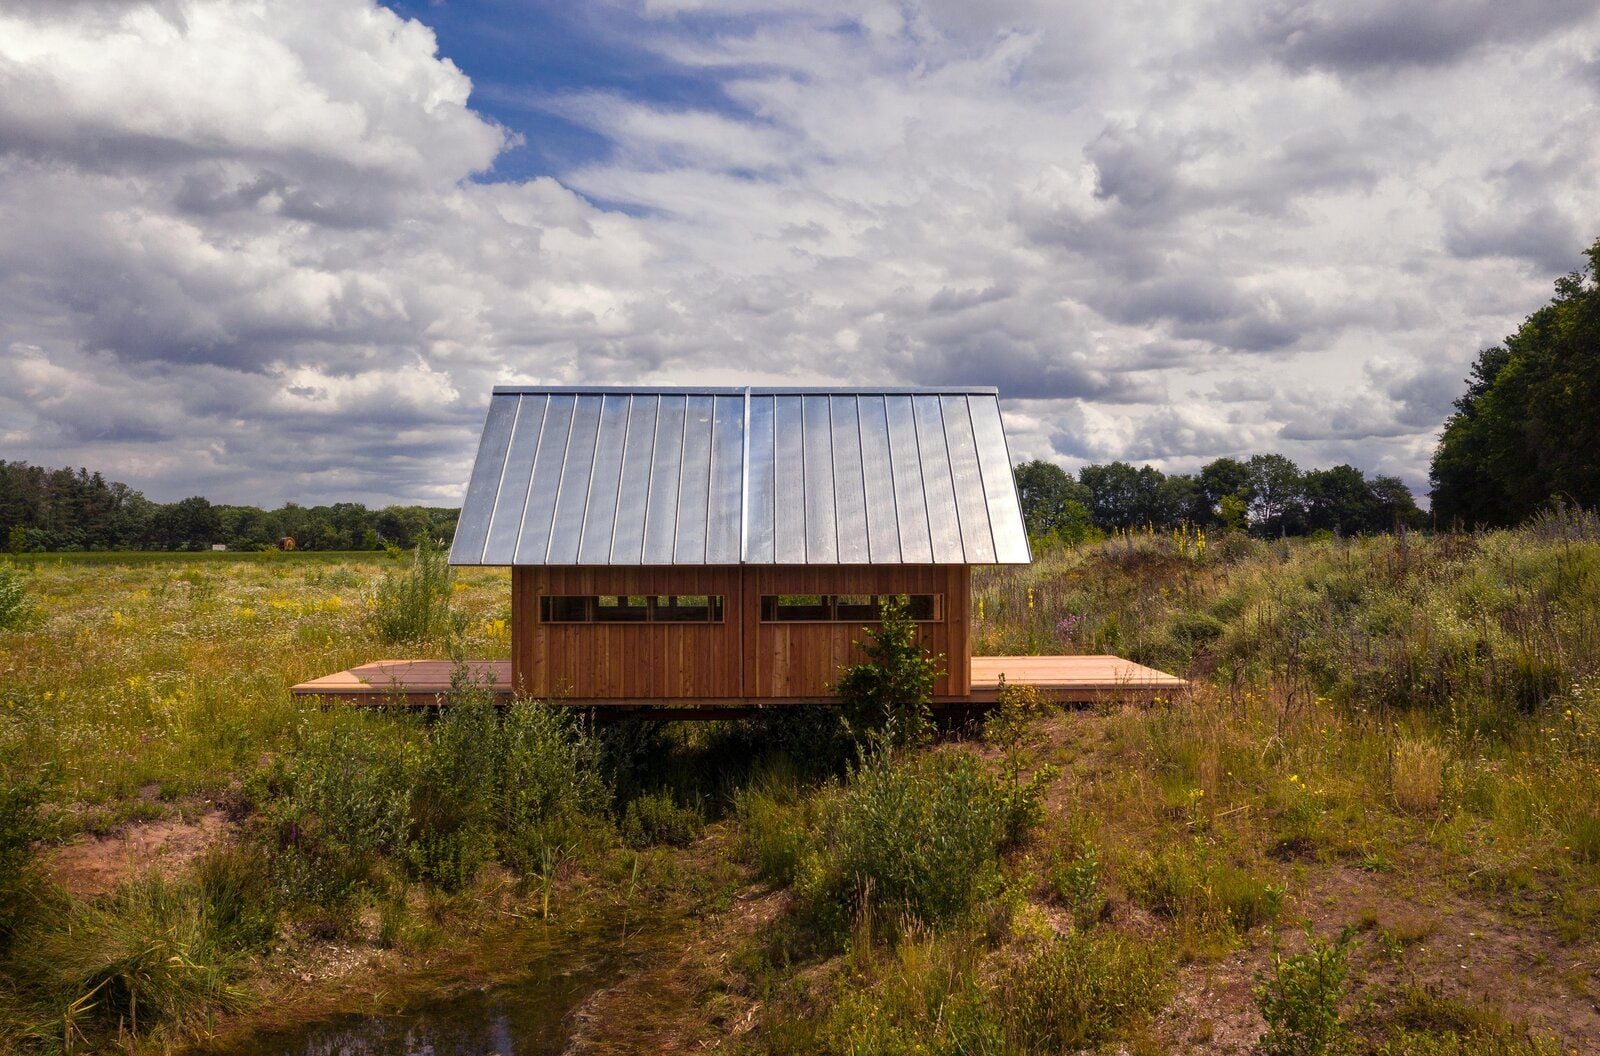 Sliding Cabin Lets in as Much (or as Little) Nature as You Want